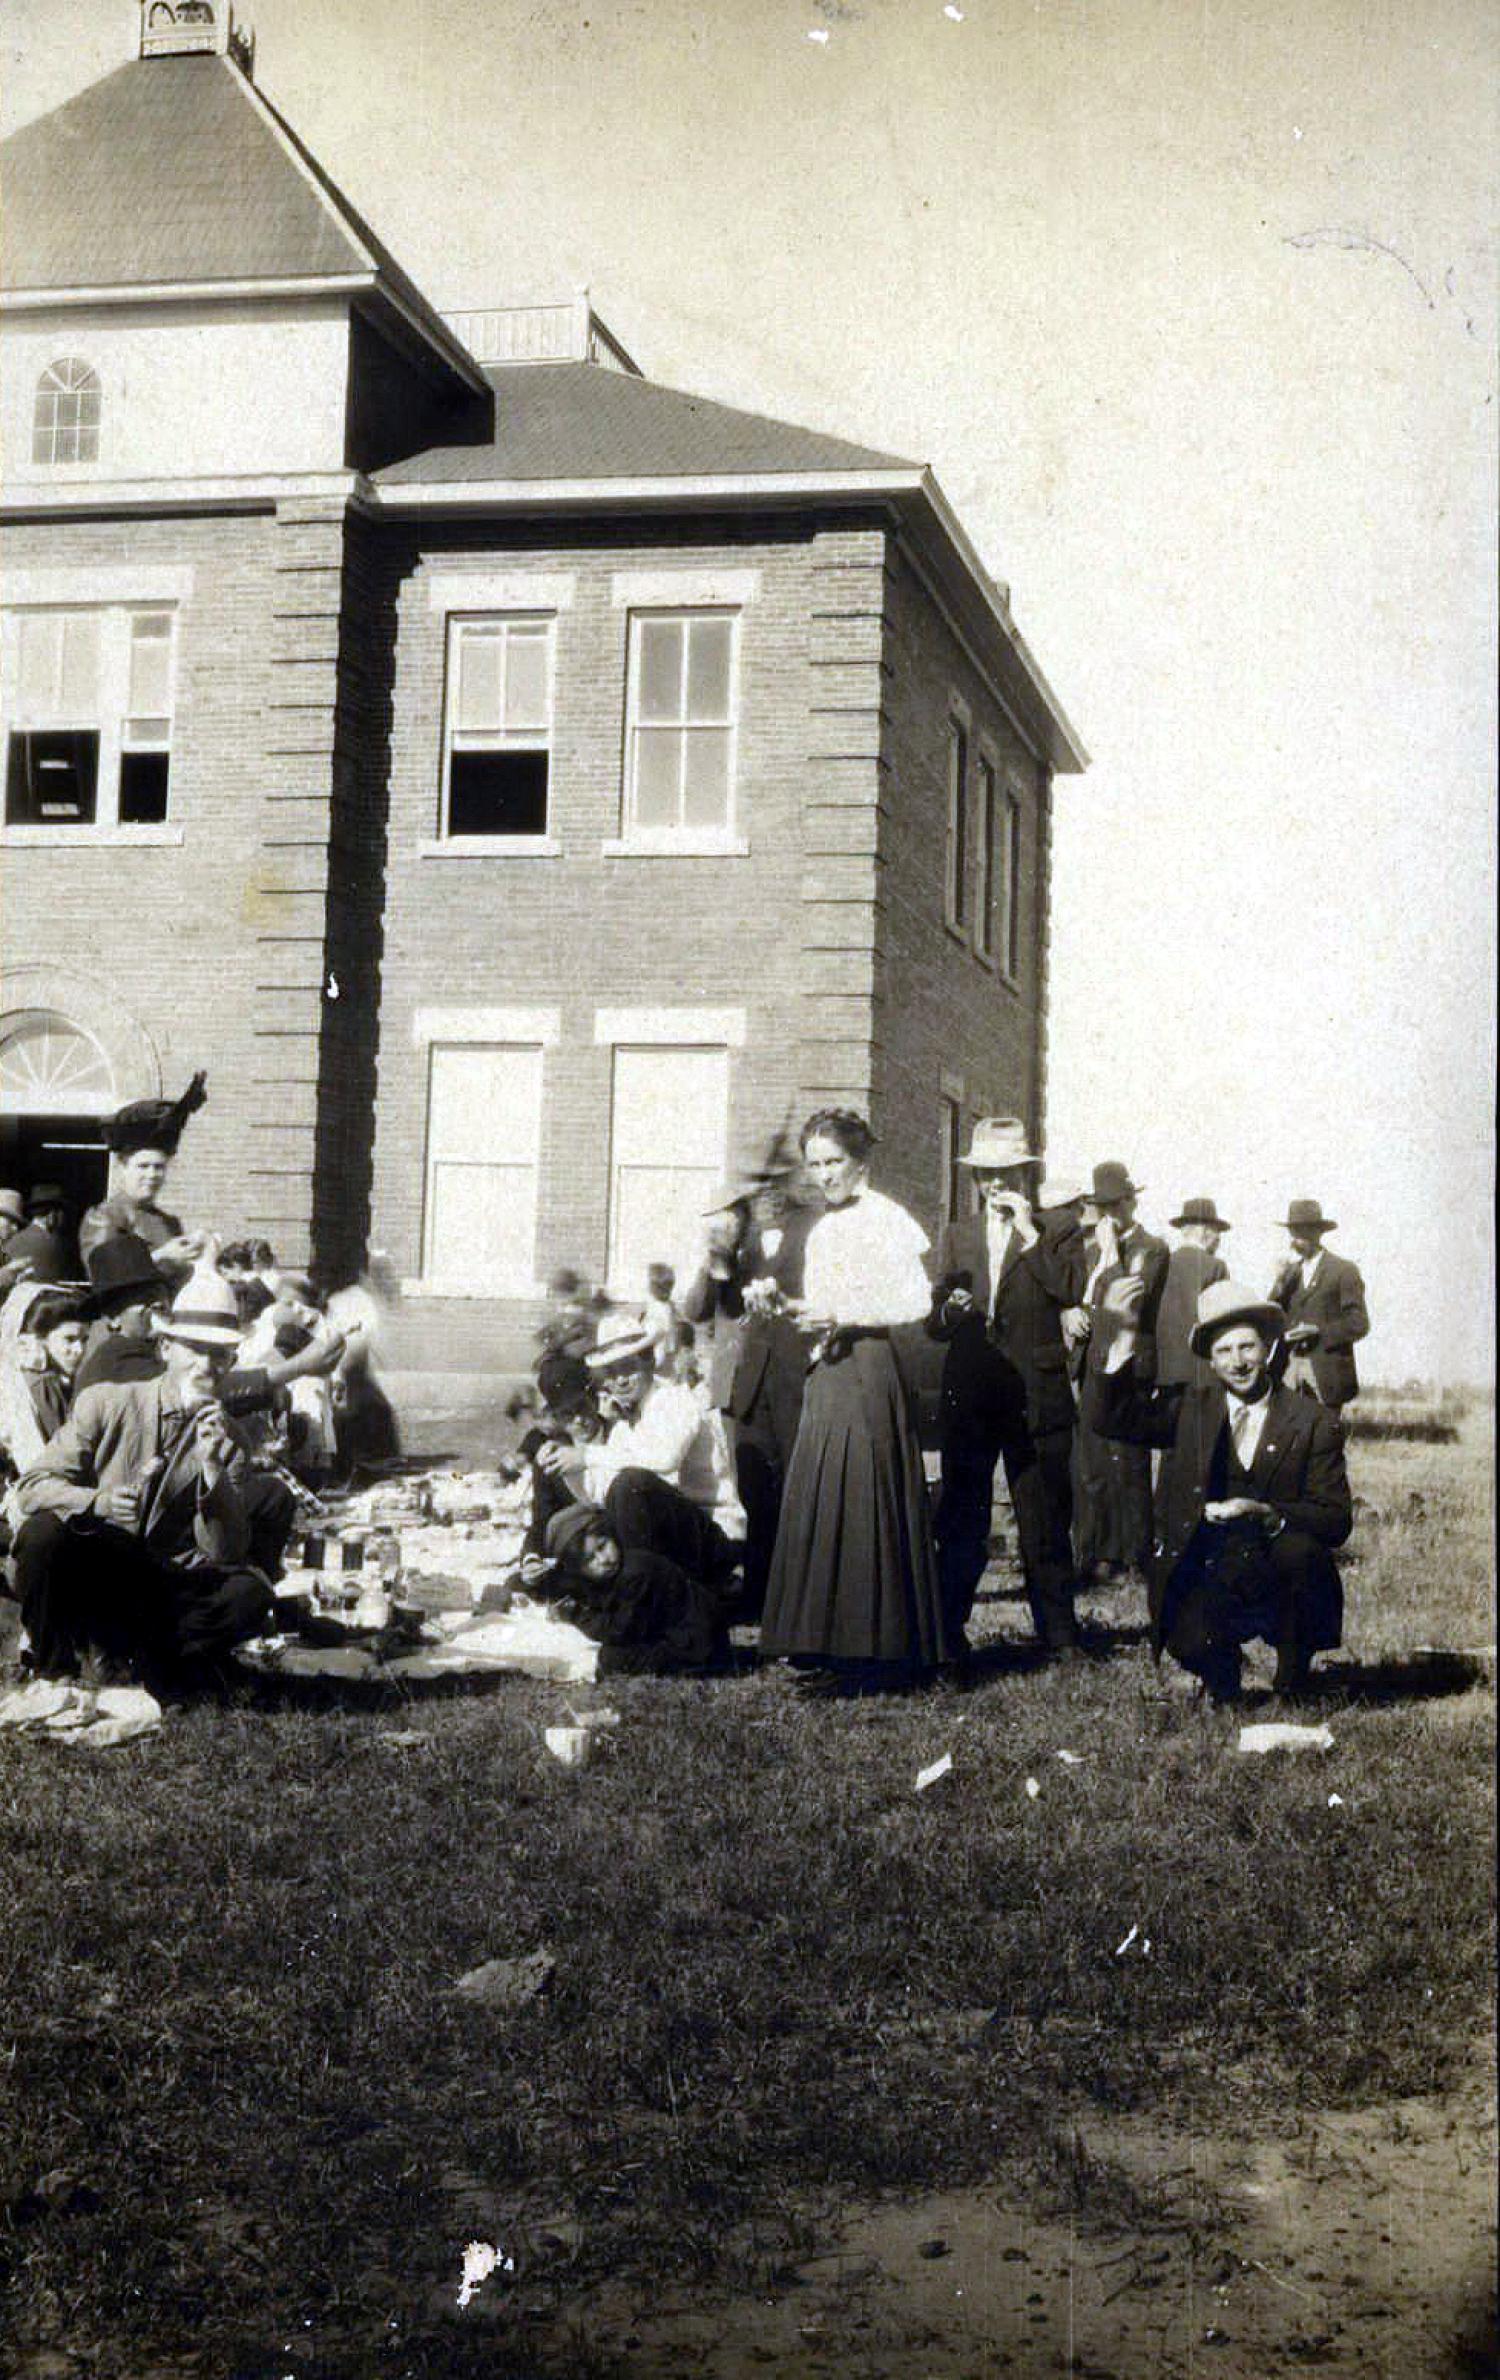 Group of students and teachers outside a school seen having a picnic.
                                                
                                                    [Sequence #]: 1 of 1
                                                